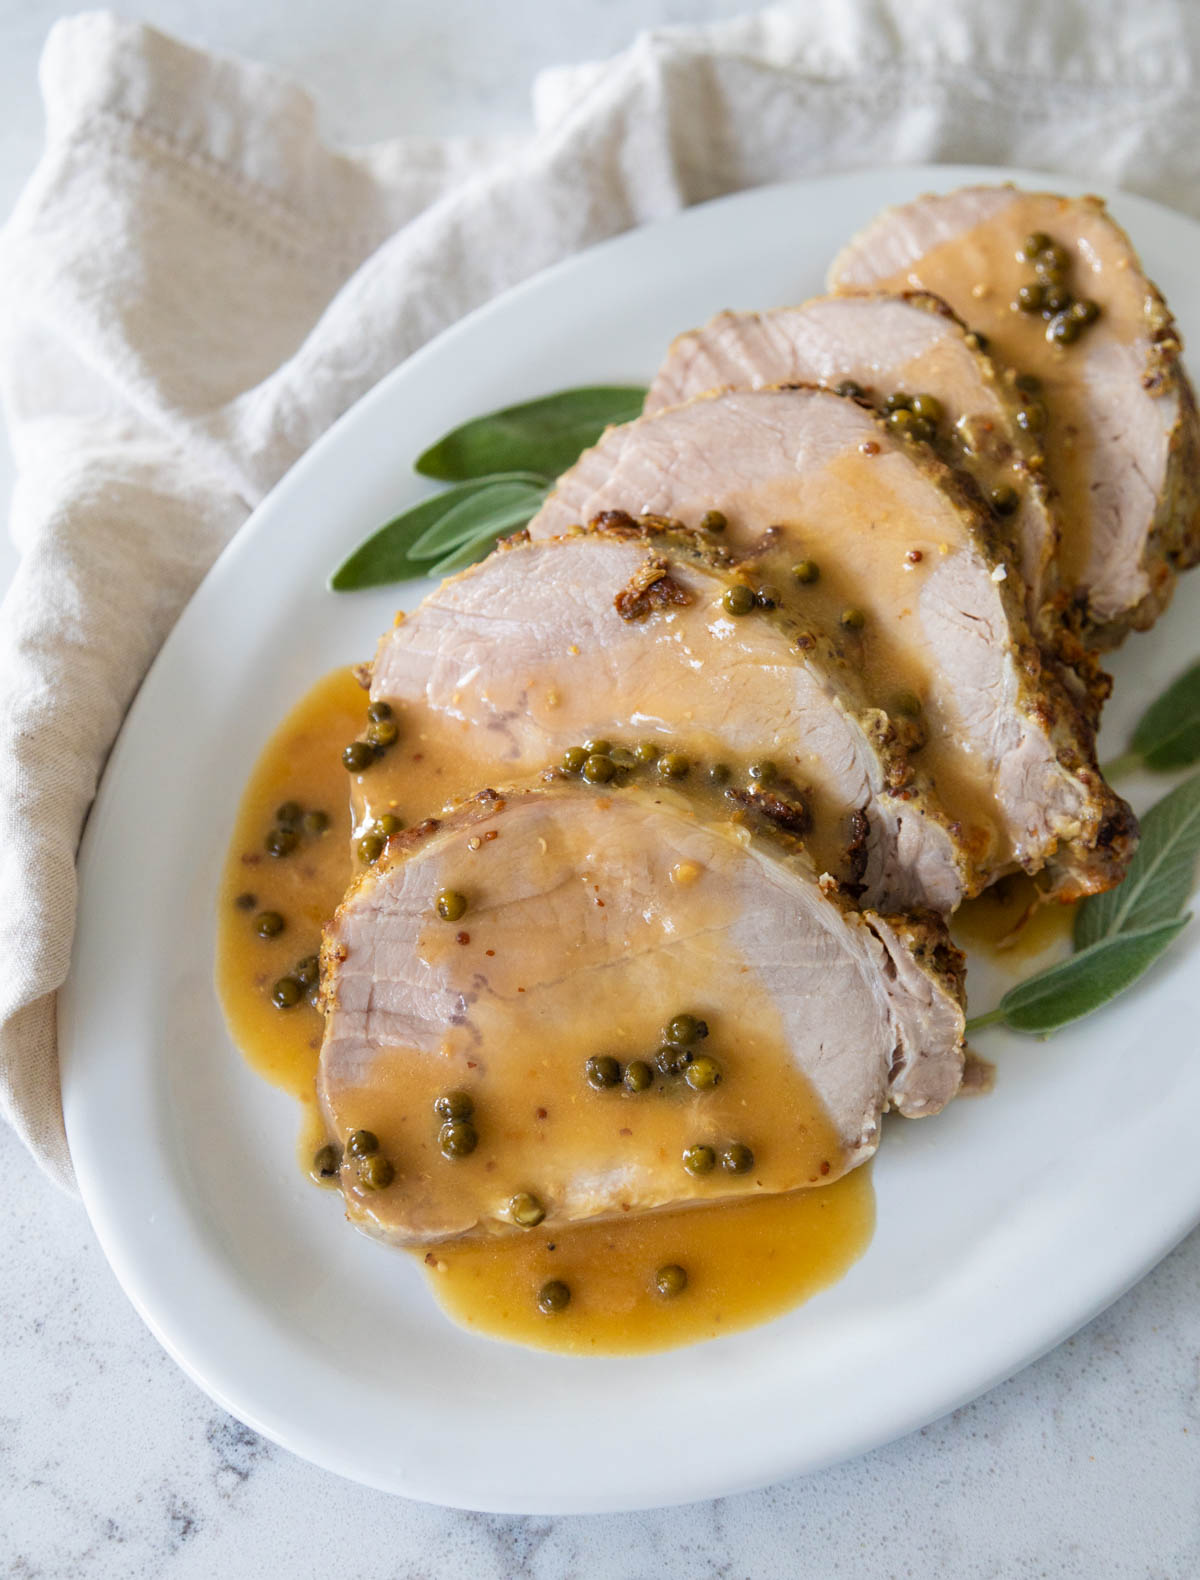 The sliced pork is served with a drizzle of green peppercorn sauce.